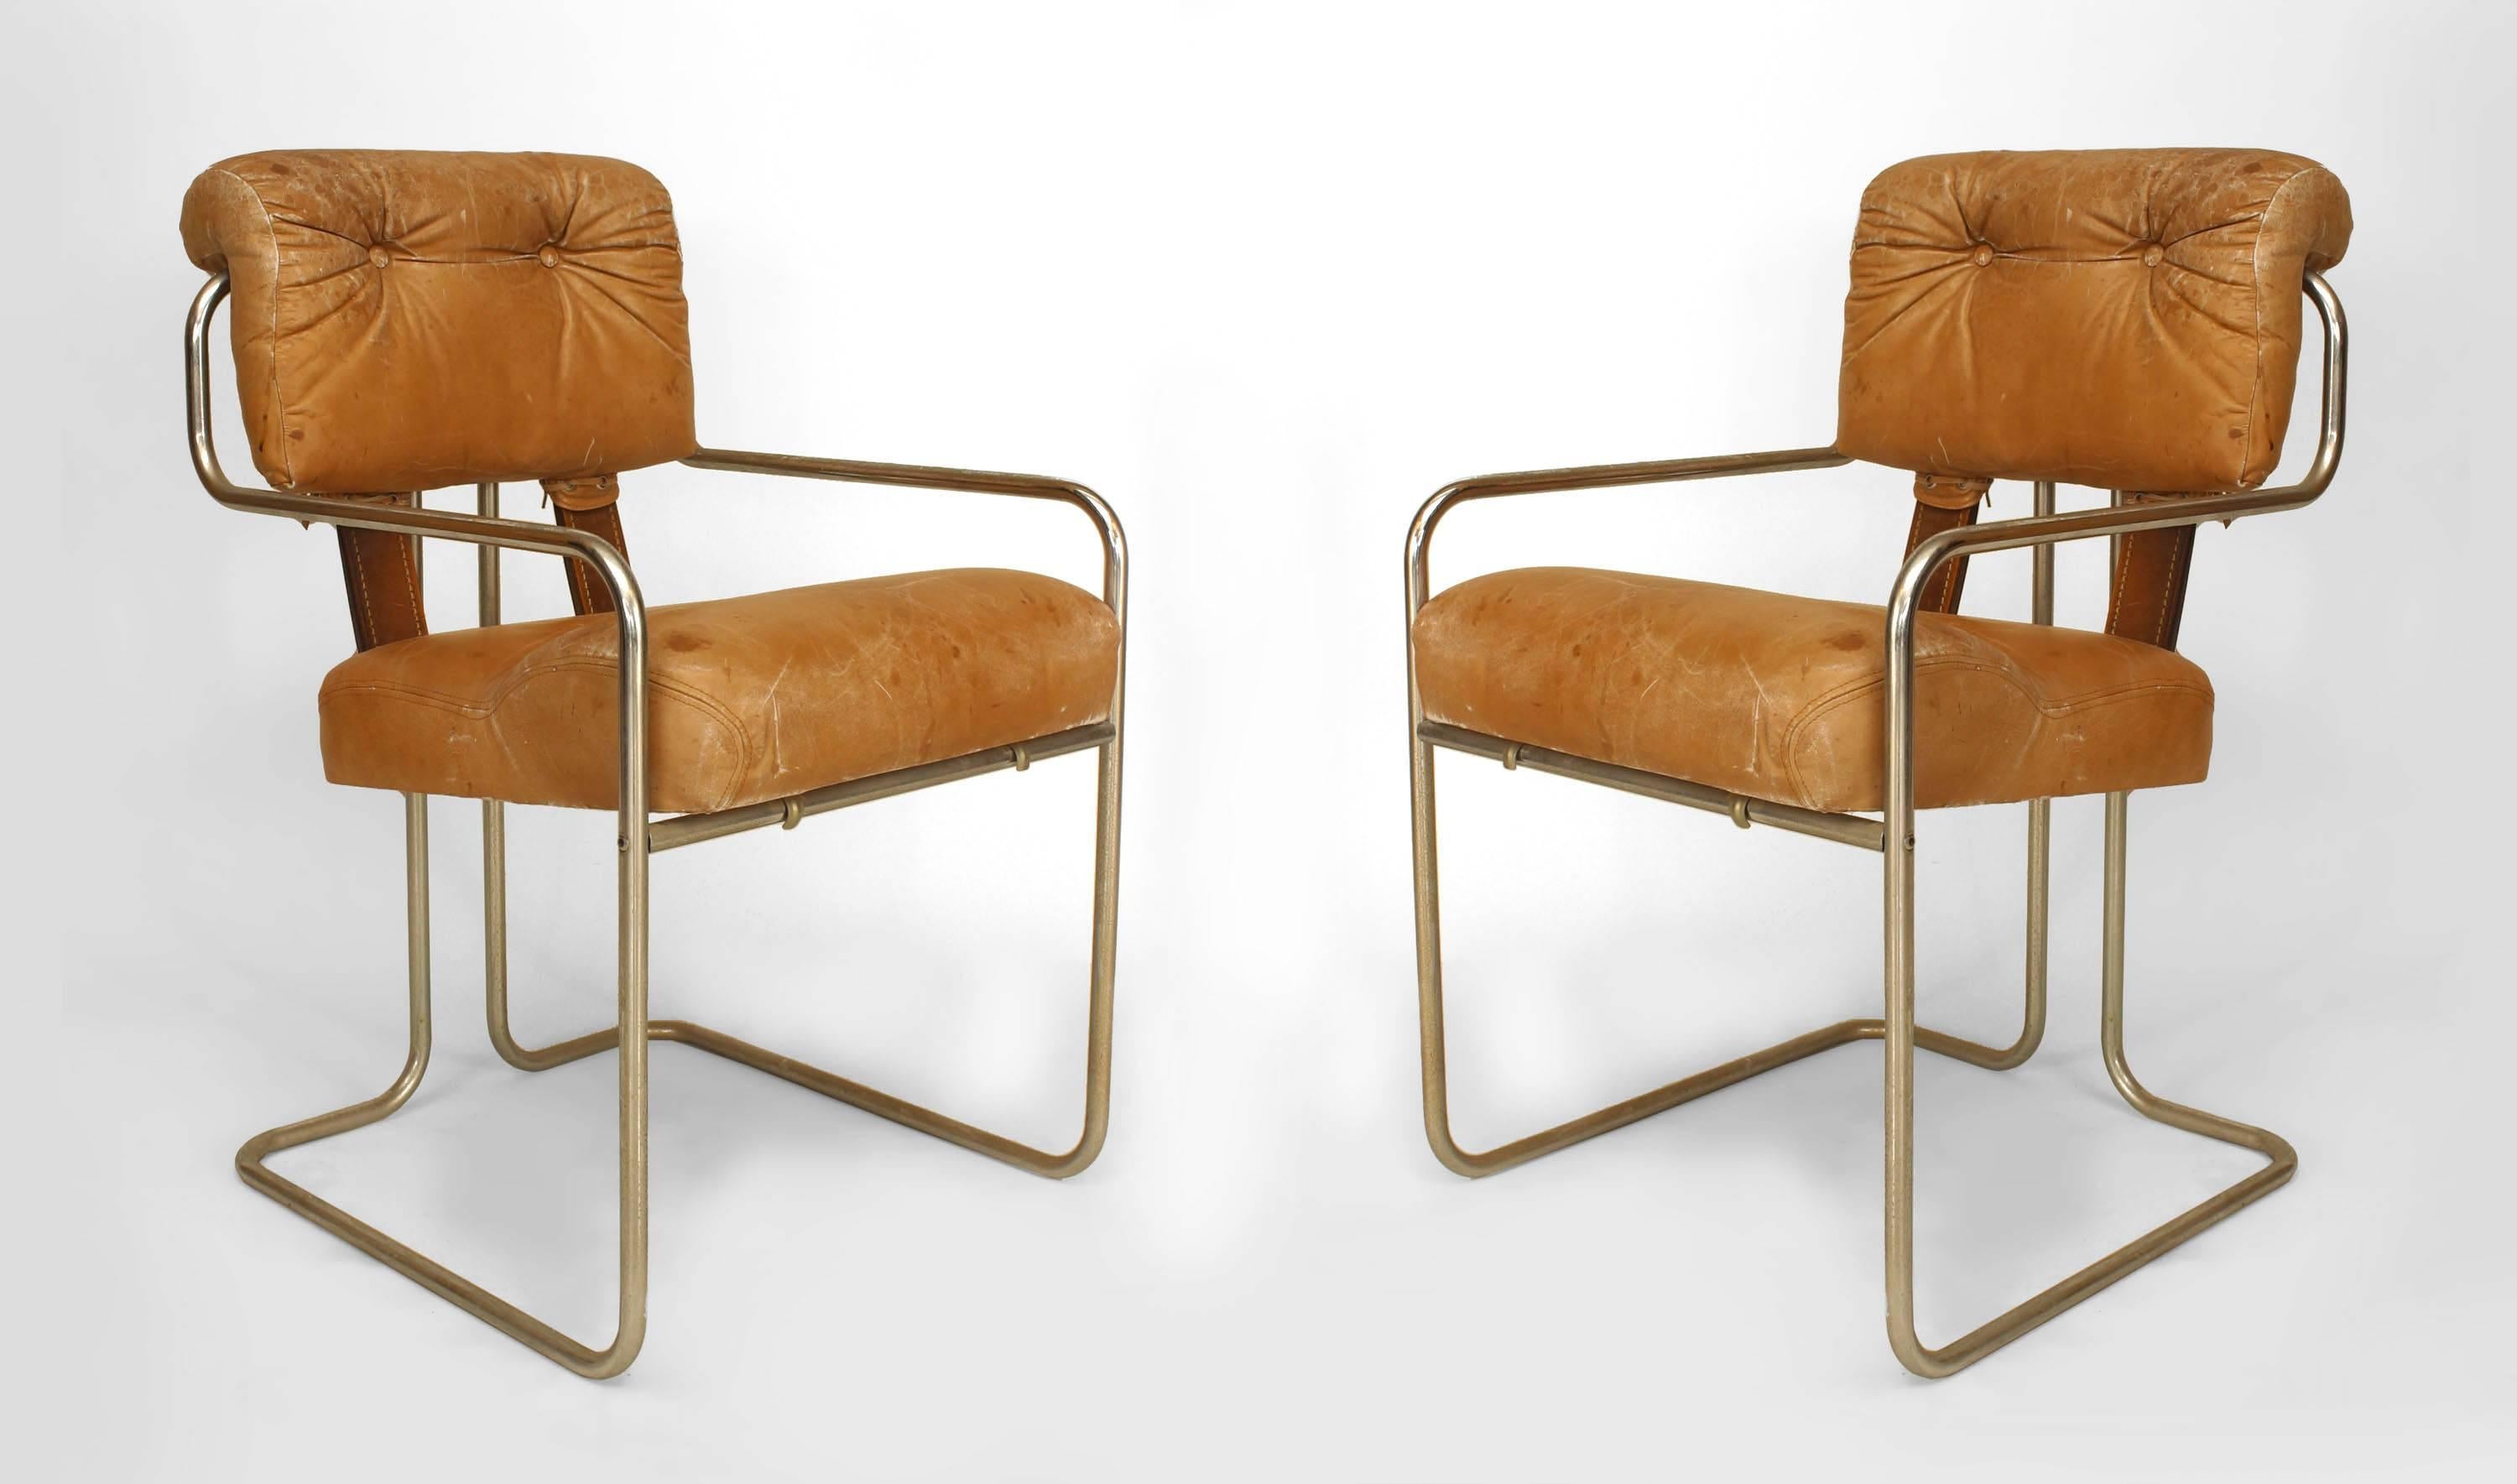 Set of 4 German Art Deco (1930s) chrome arm chairs with brown leather tufted seat and back connected with straps. (by WALTER KNOLL)
